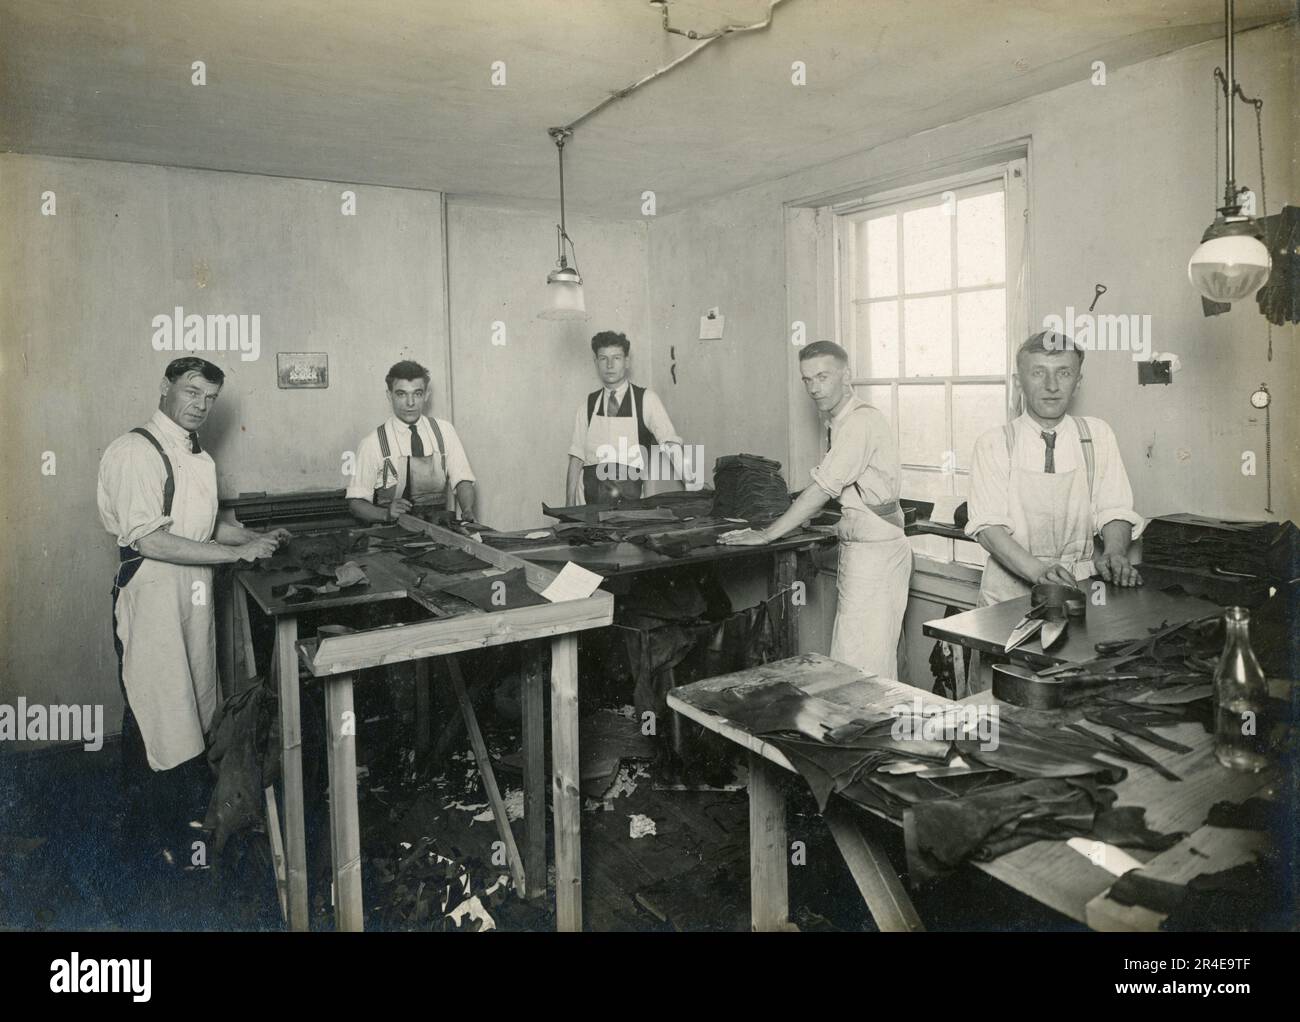 Glove Manufacture in 1930s. A small glove manufacturer operating in the 1930s with a small workforce. Stock Photo